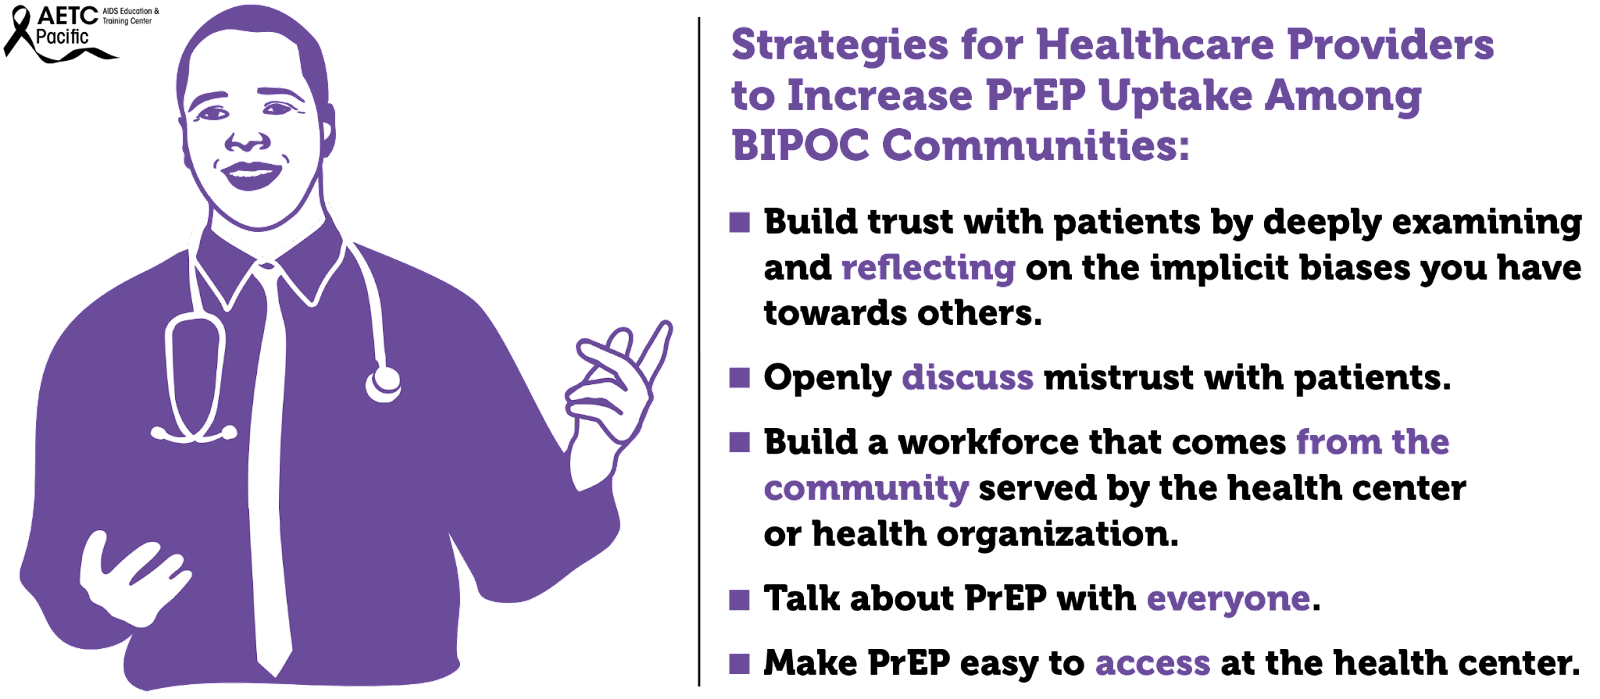 Strategies for Healthcare Providers to Increase PrEP Uptake among BIPOC Communities.